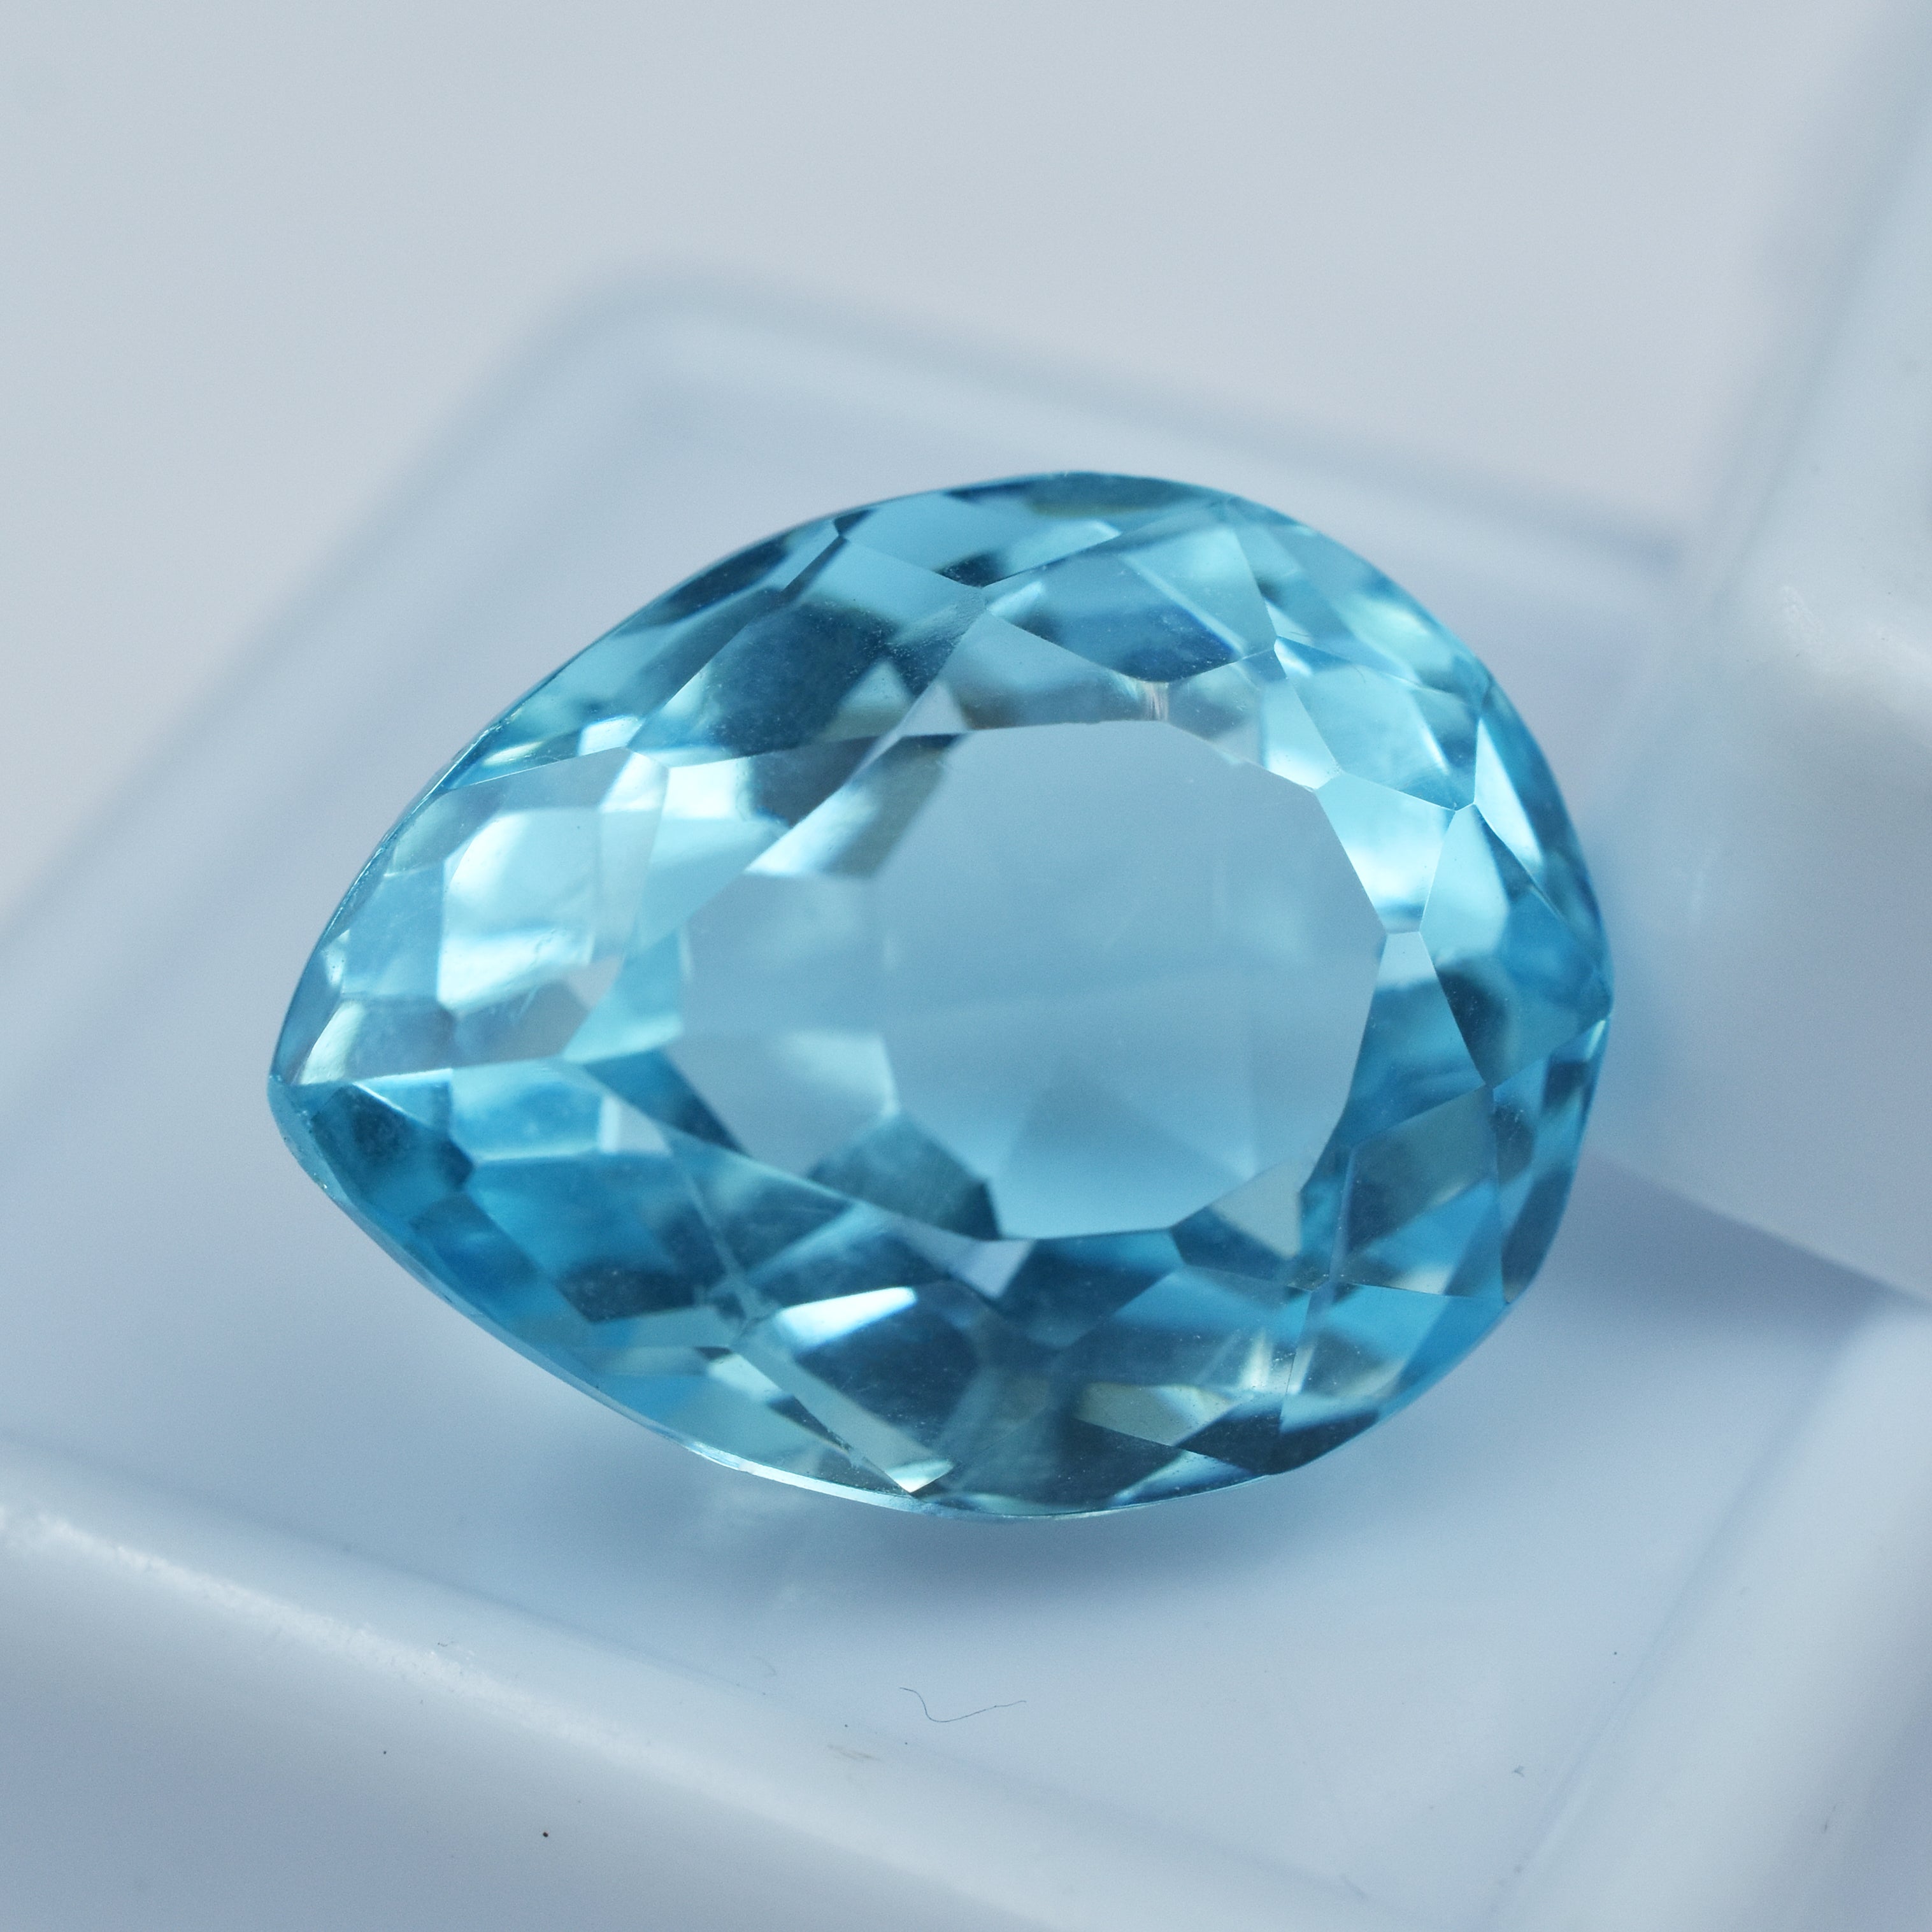 Winter Sale With Best Aqua Gem !!! Certified Natural 14.22 Ct Pear Cut Pendant Making Aquamarine Gem Loose Gemstone | Free Delivery With Excellent Gift